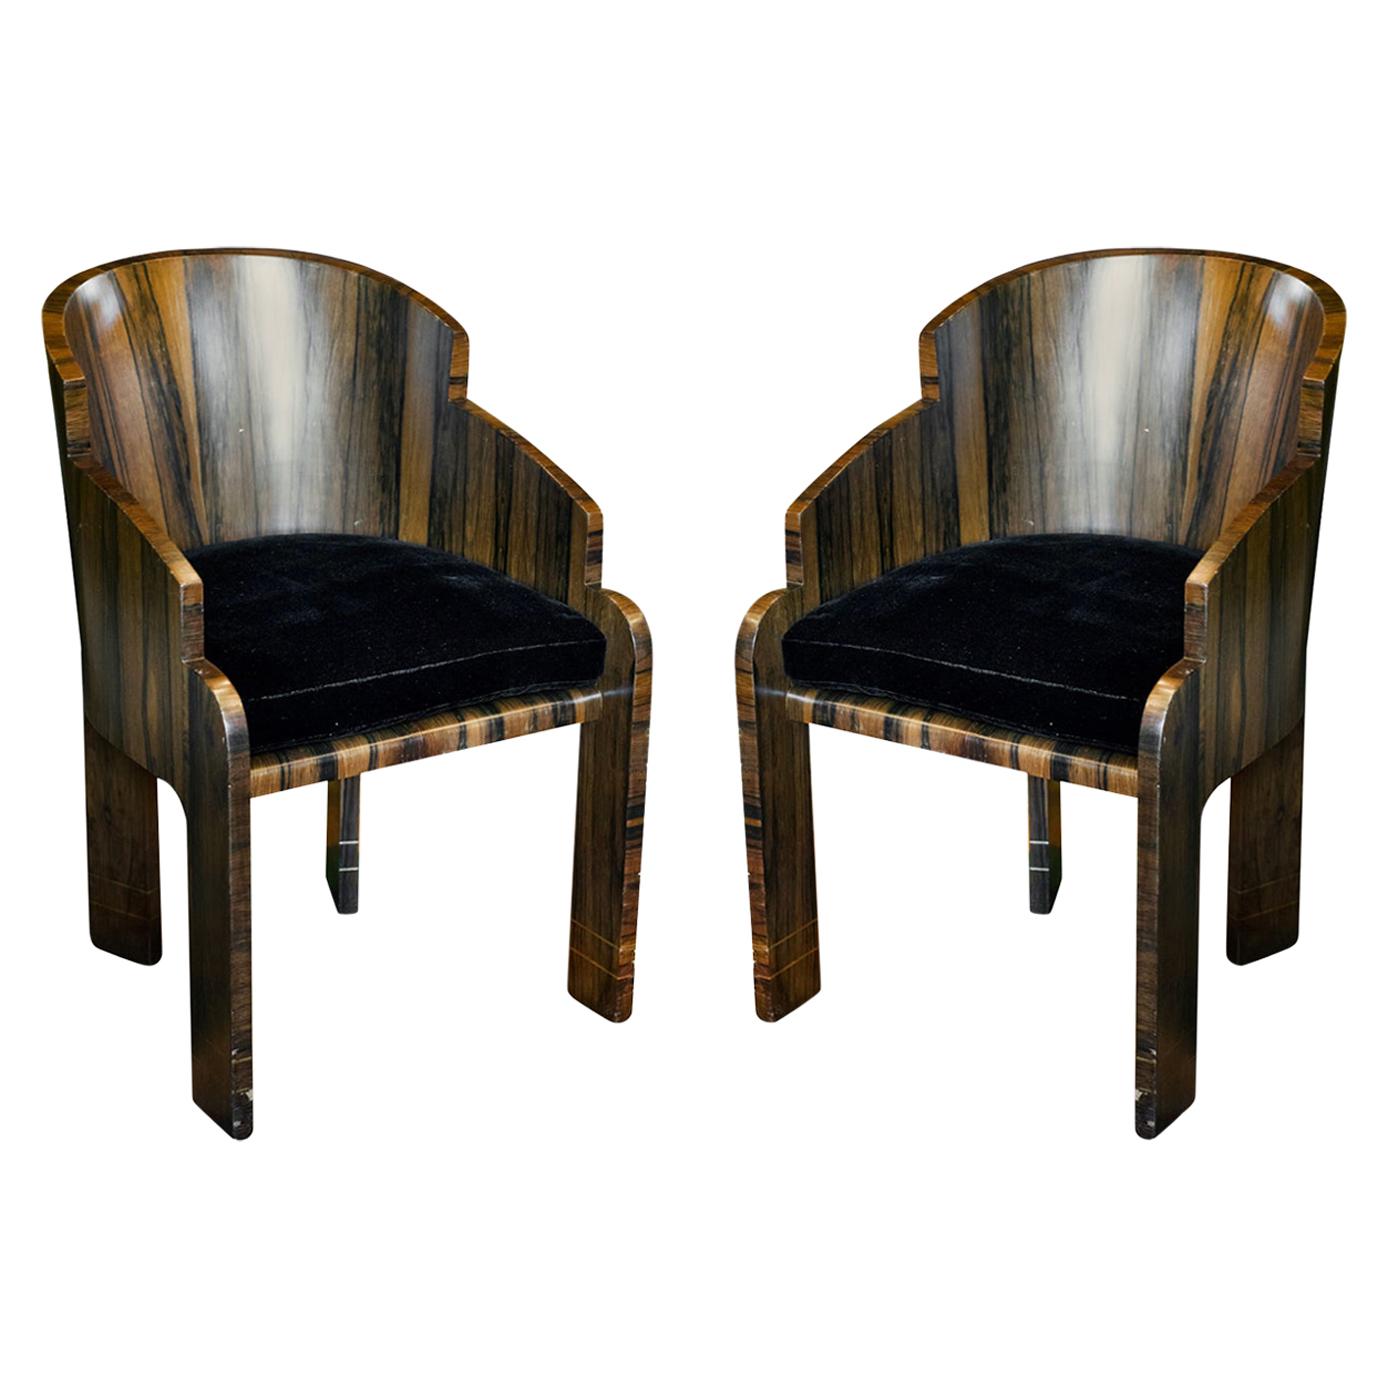 Pair of Art Deco Rosewood Barrel Back Tub Chairs, France, 1940